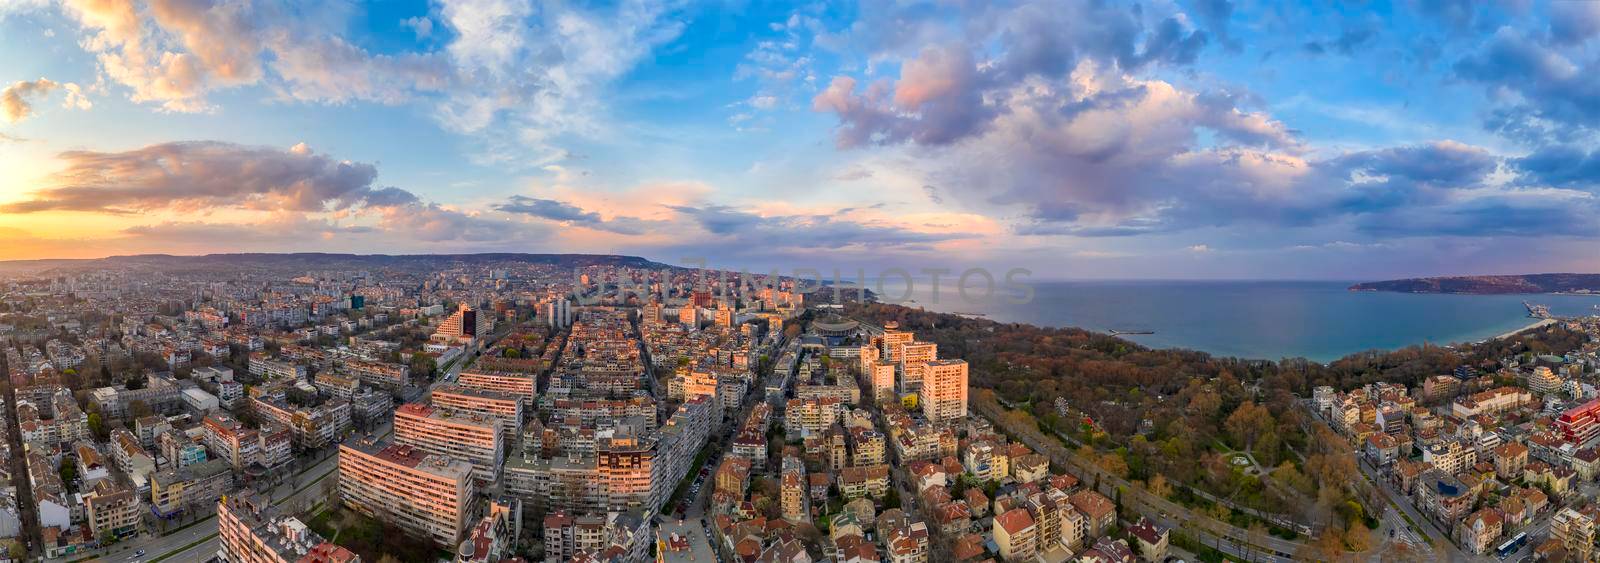 Stunning aerial panoramic view of the sky with colorful clouds over the city of Varna, Bulgaria. by EdVal